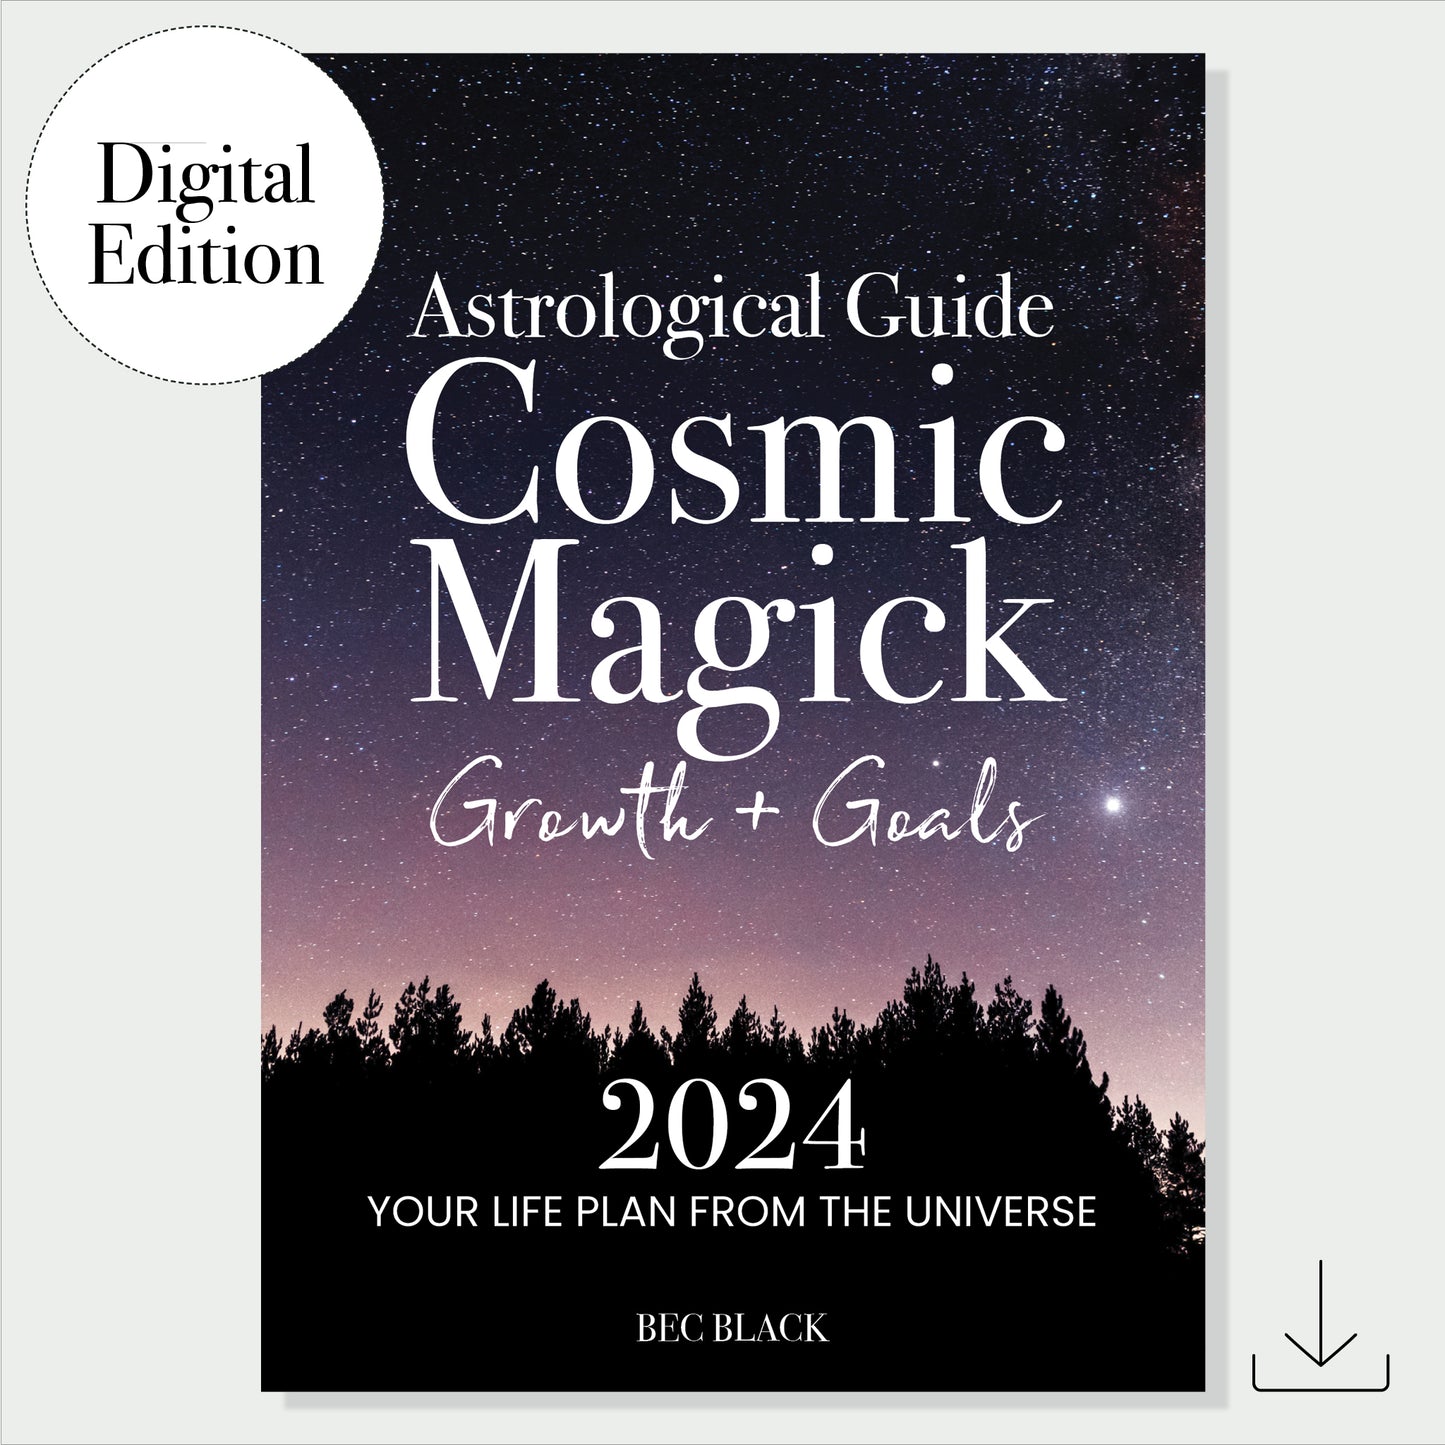 Cosmic Magick - Digital - Astrological Guide 2024: Goals and Growth through Astrology